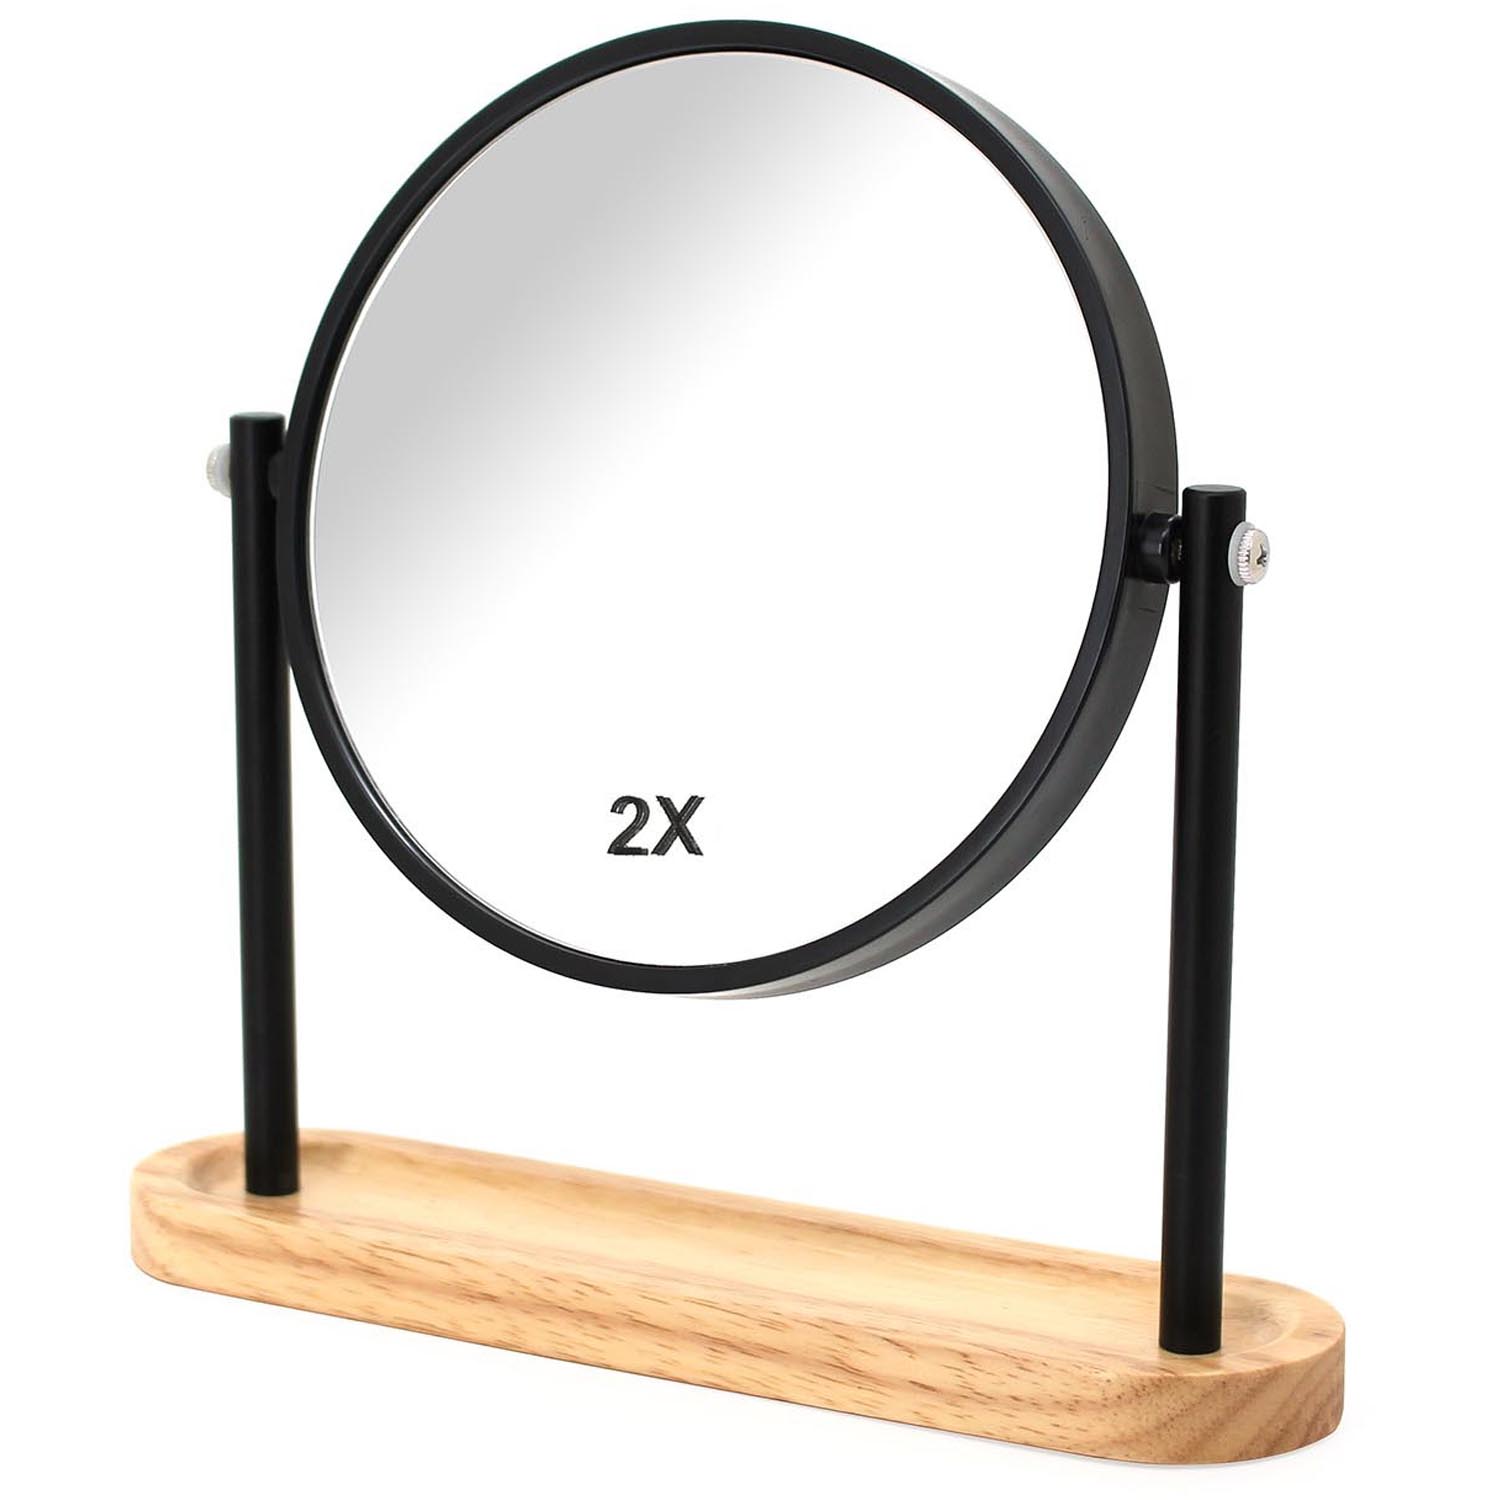 Bamboo and Black Cosmetic Mirror Image